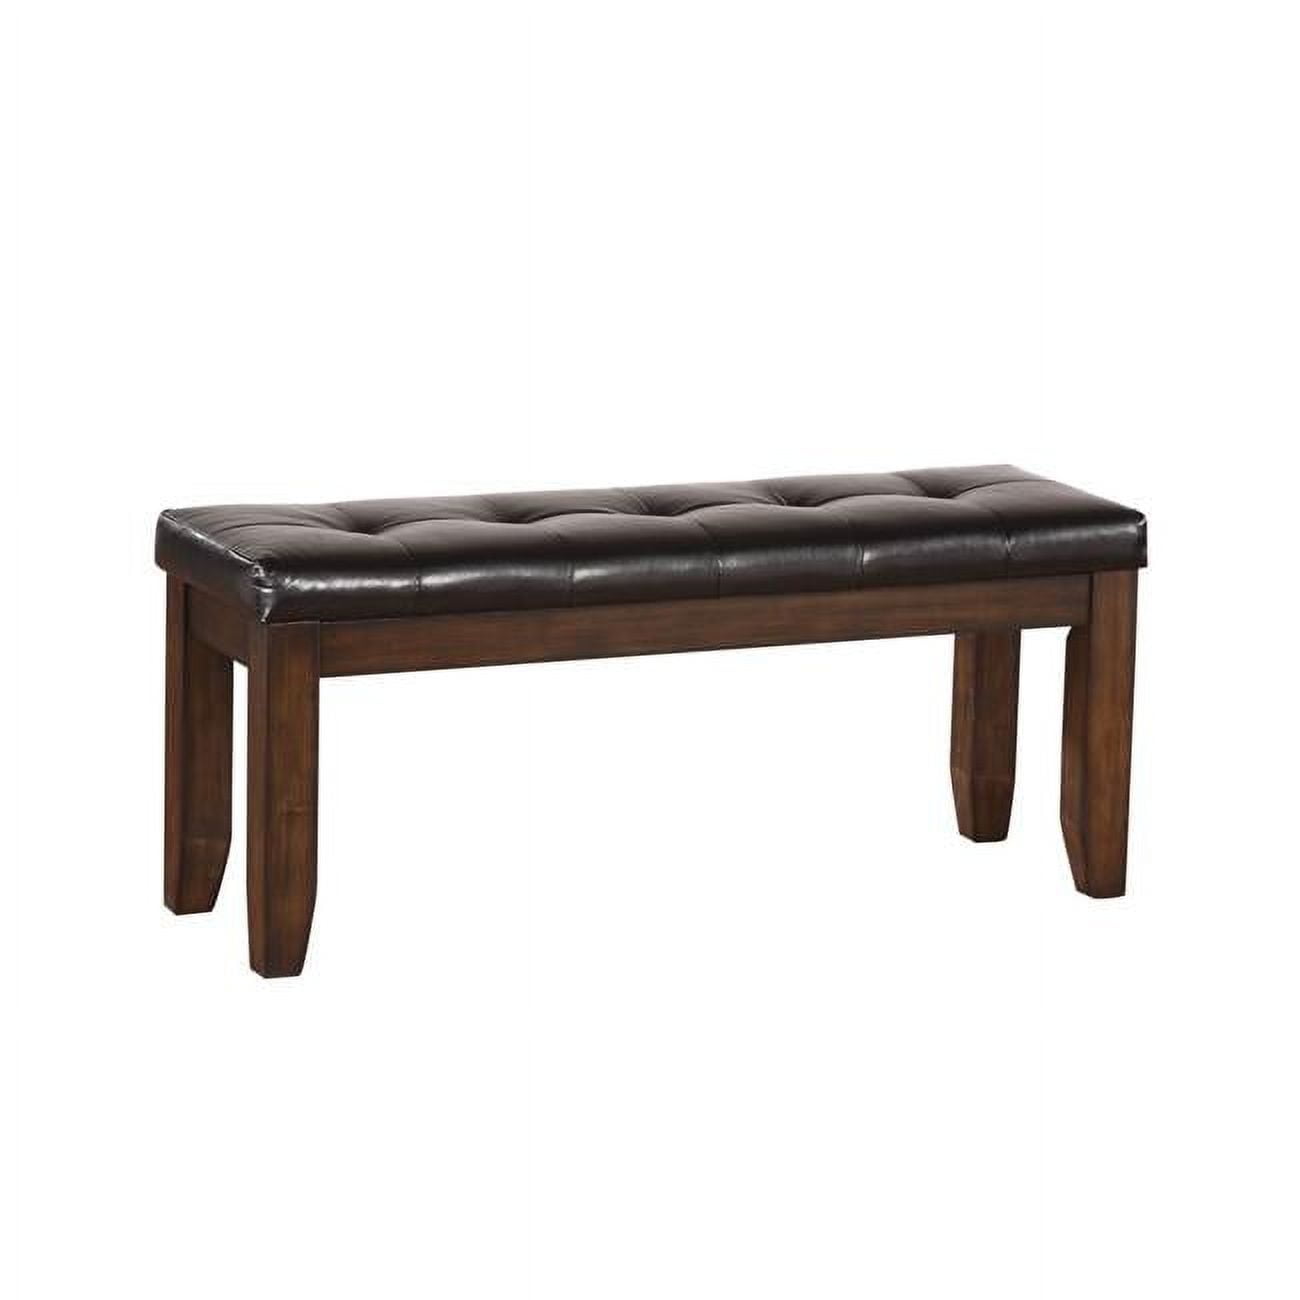 Picture of Benzara BM196678 Leatherette Upholstered Tufted Wooden Bench with Chamfered Legs, Brown - 19.5 x 17 x 48 in.